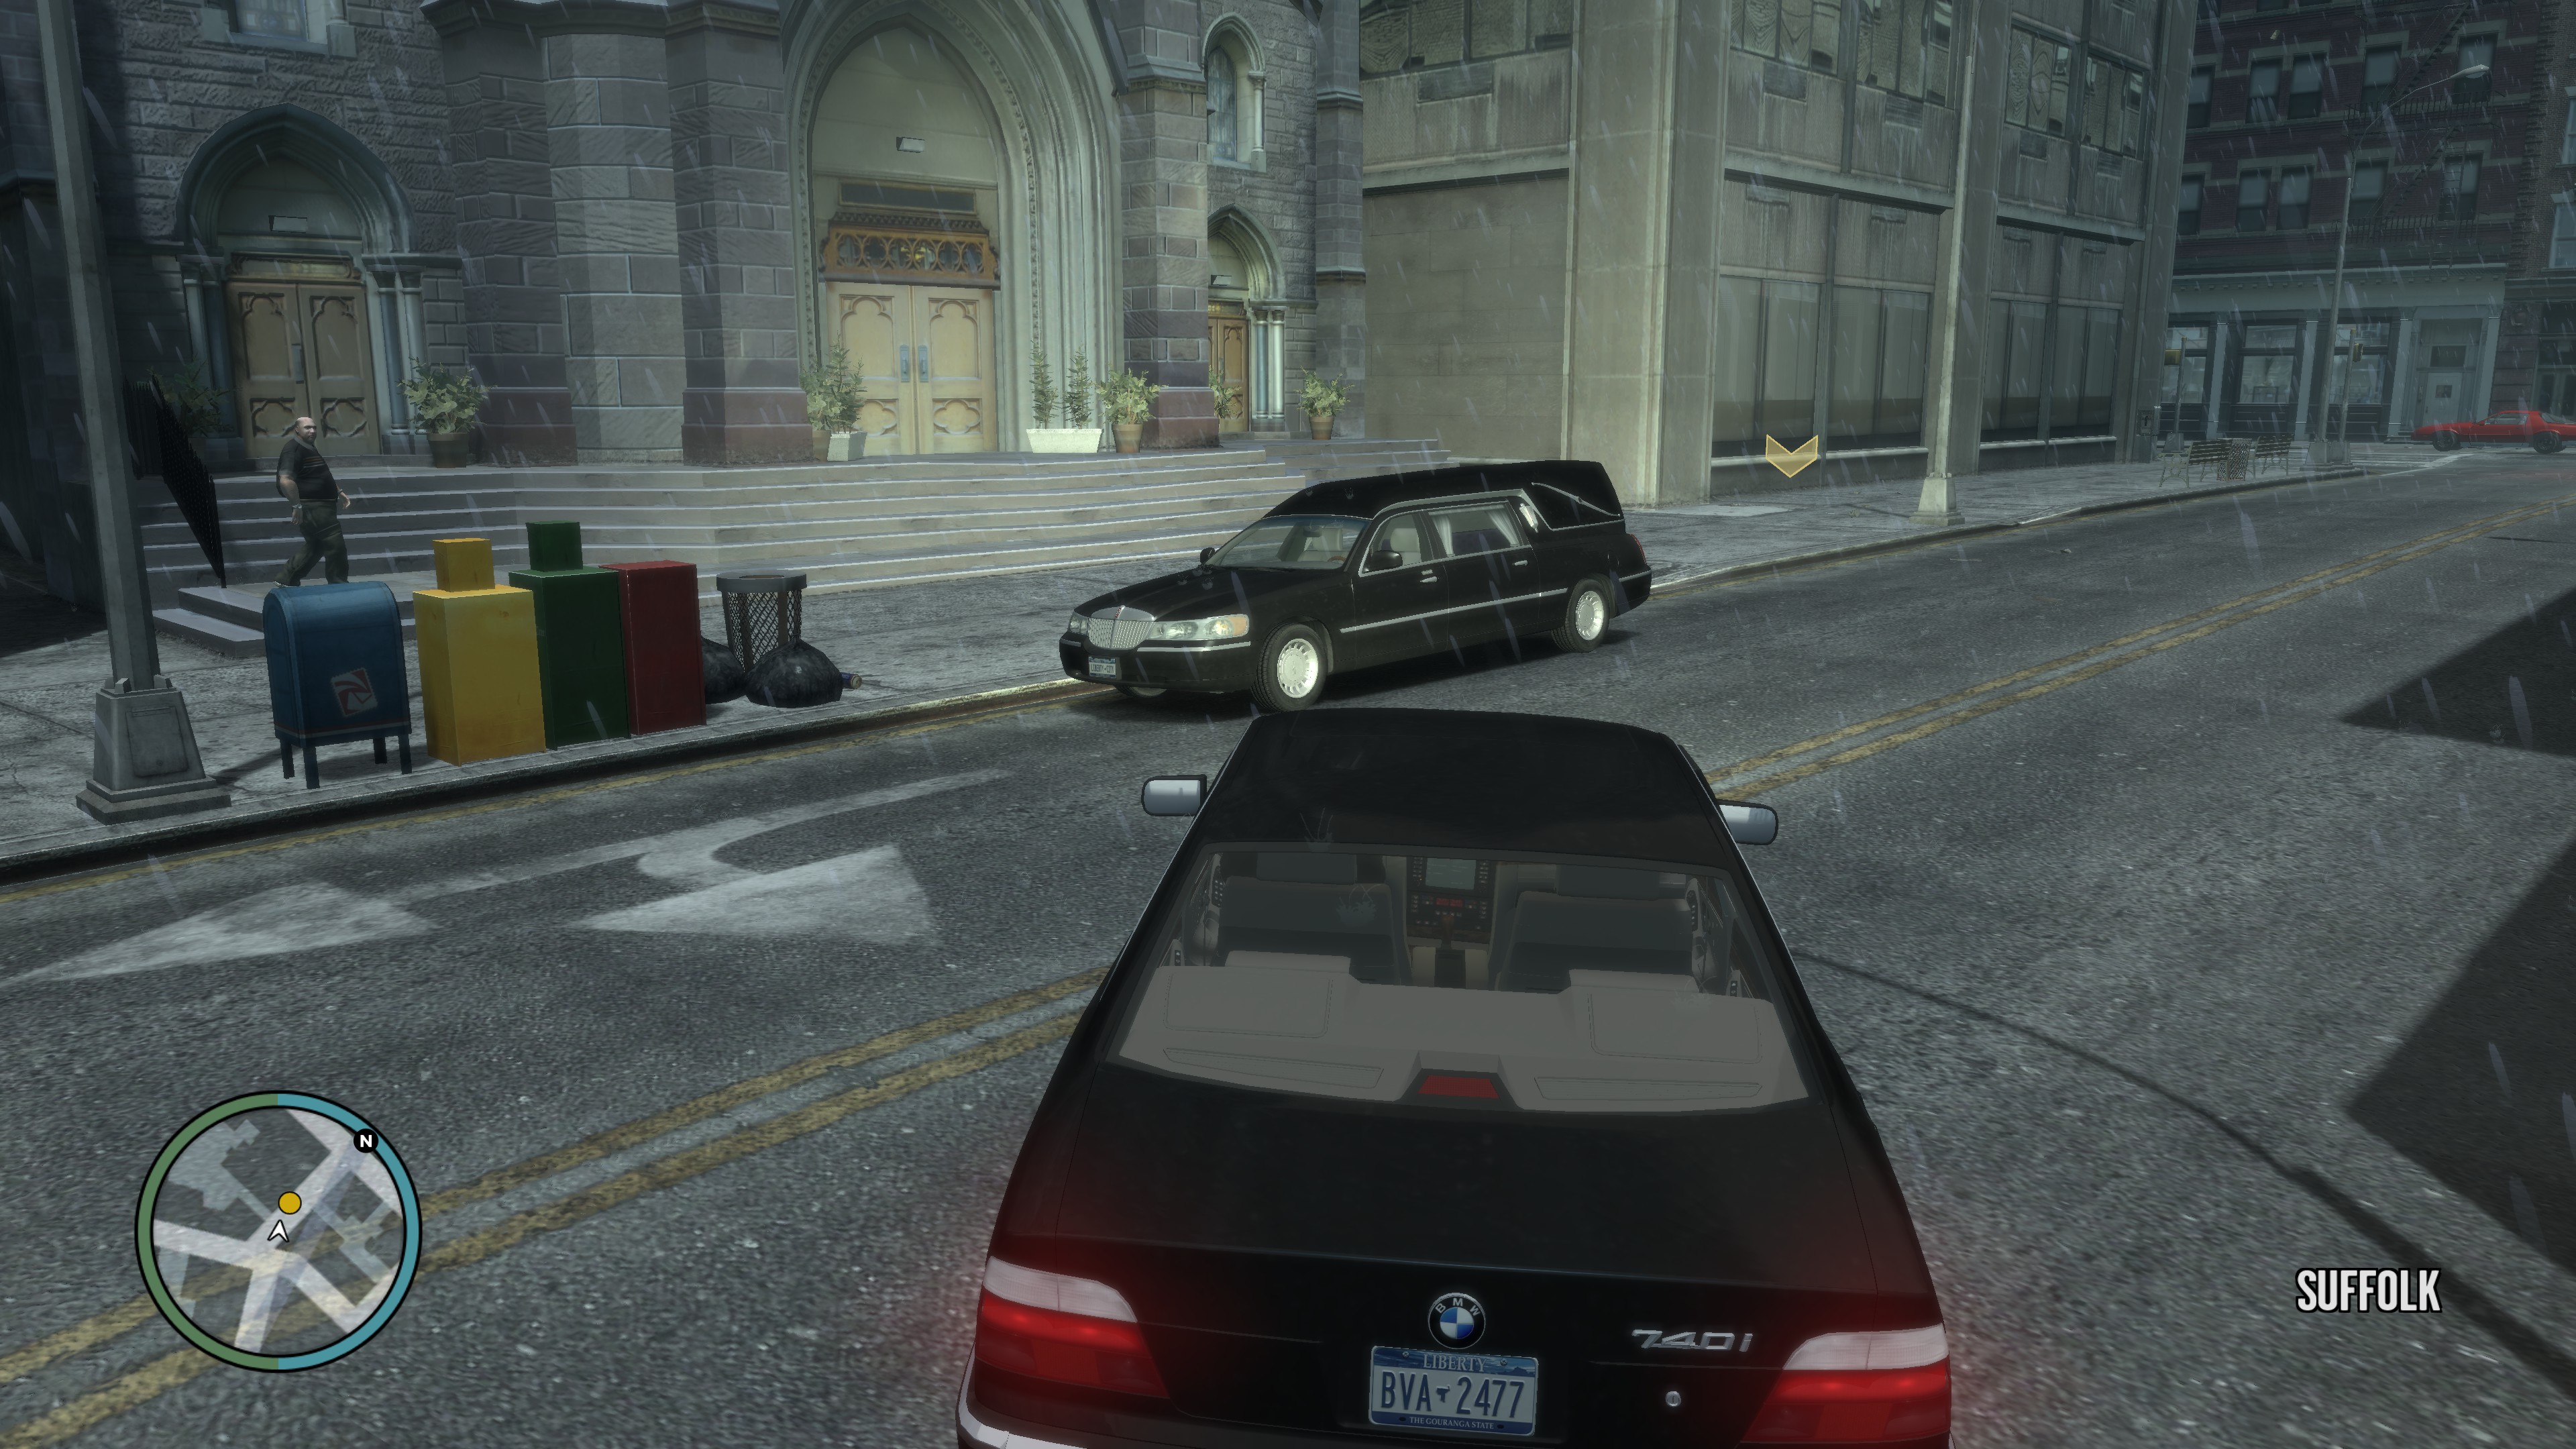 Image 4 - GTA IV realistic car pack standalone mod for Grand Theft